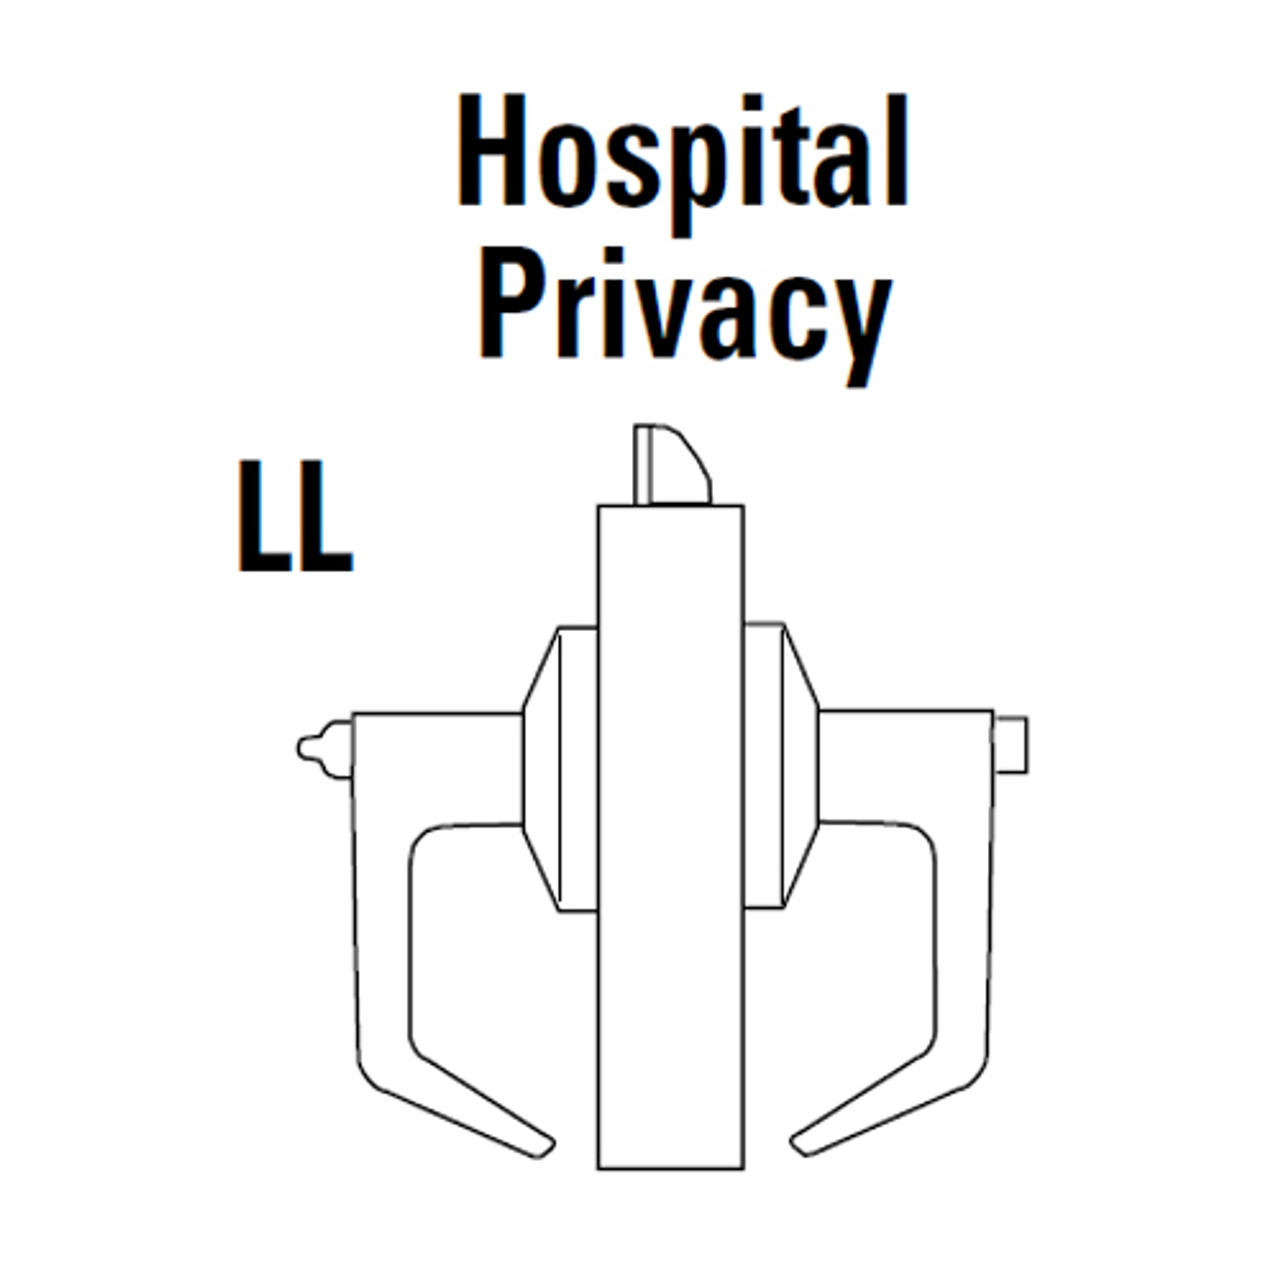 9K30LL14LS3605 Best 9K Series Hospital Privacy Heavy Duty Cylindrical Lever Locks in Bright Brass